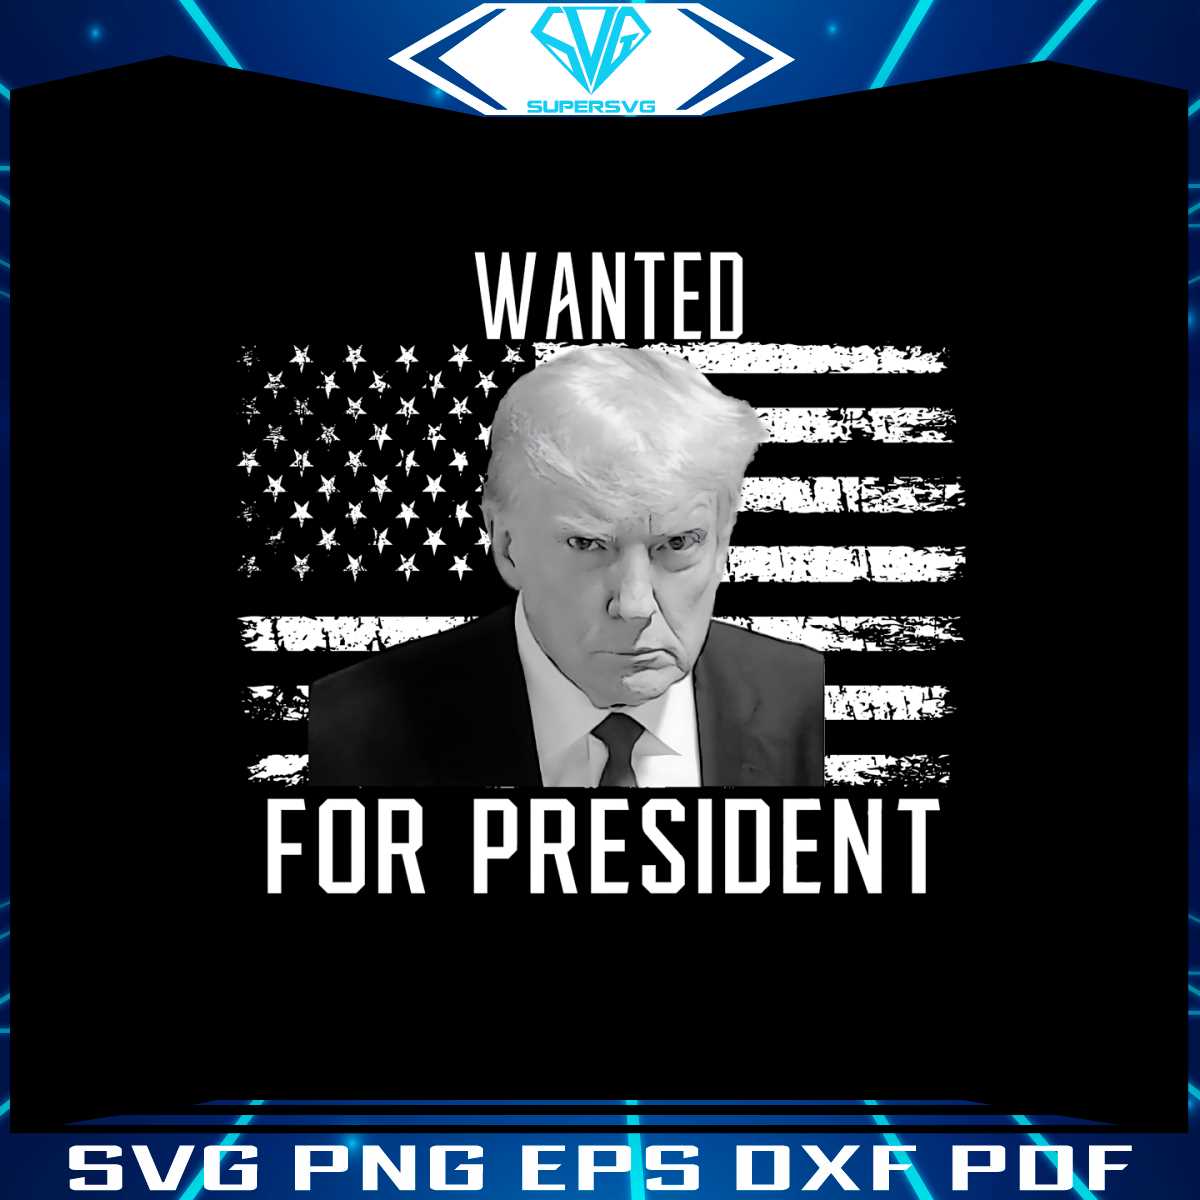 trump-patriot-wanted-for-president-png-sublimation